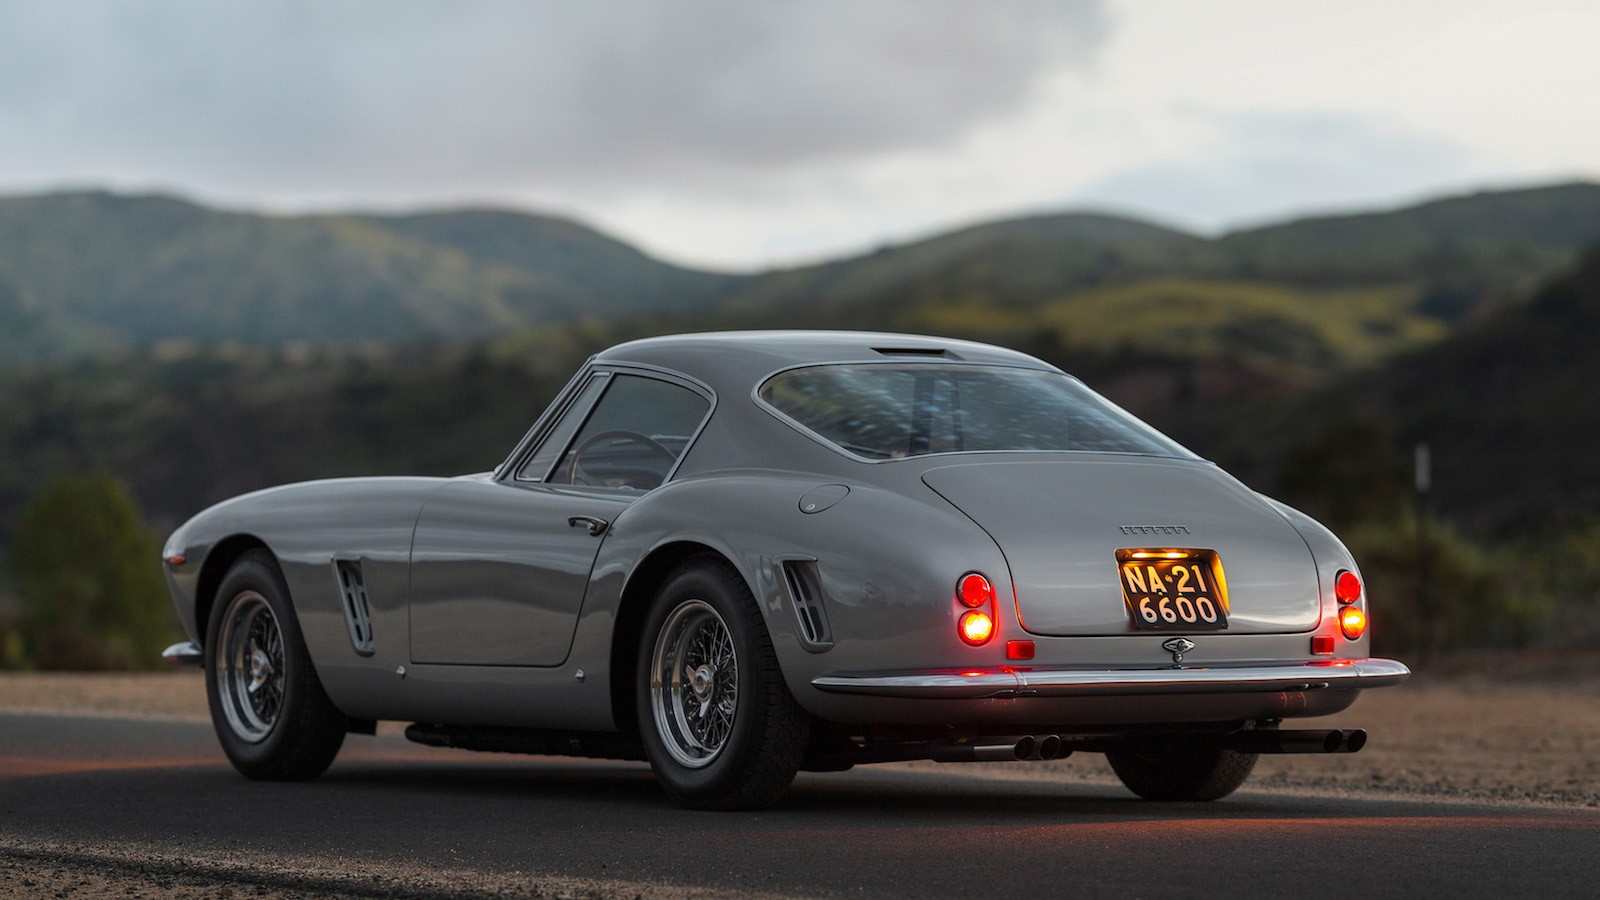 2019's most expensive classic cars